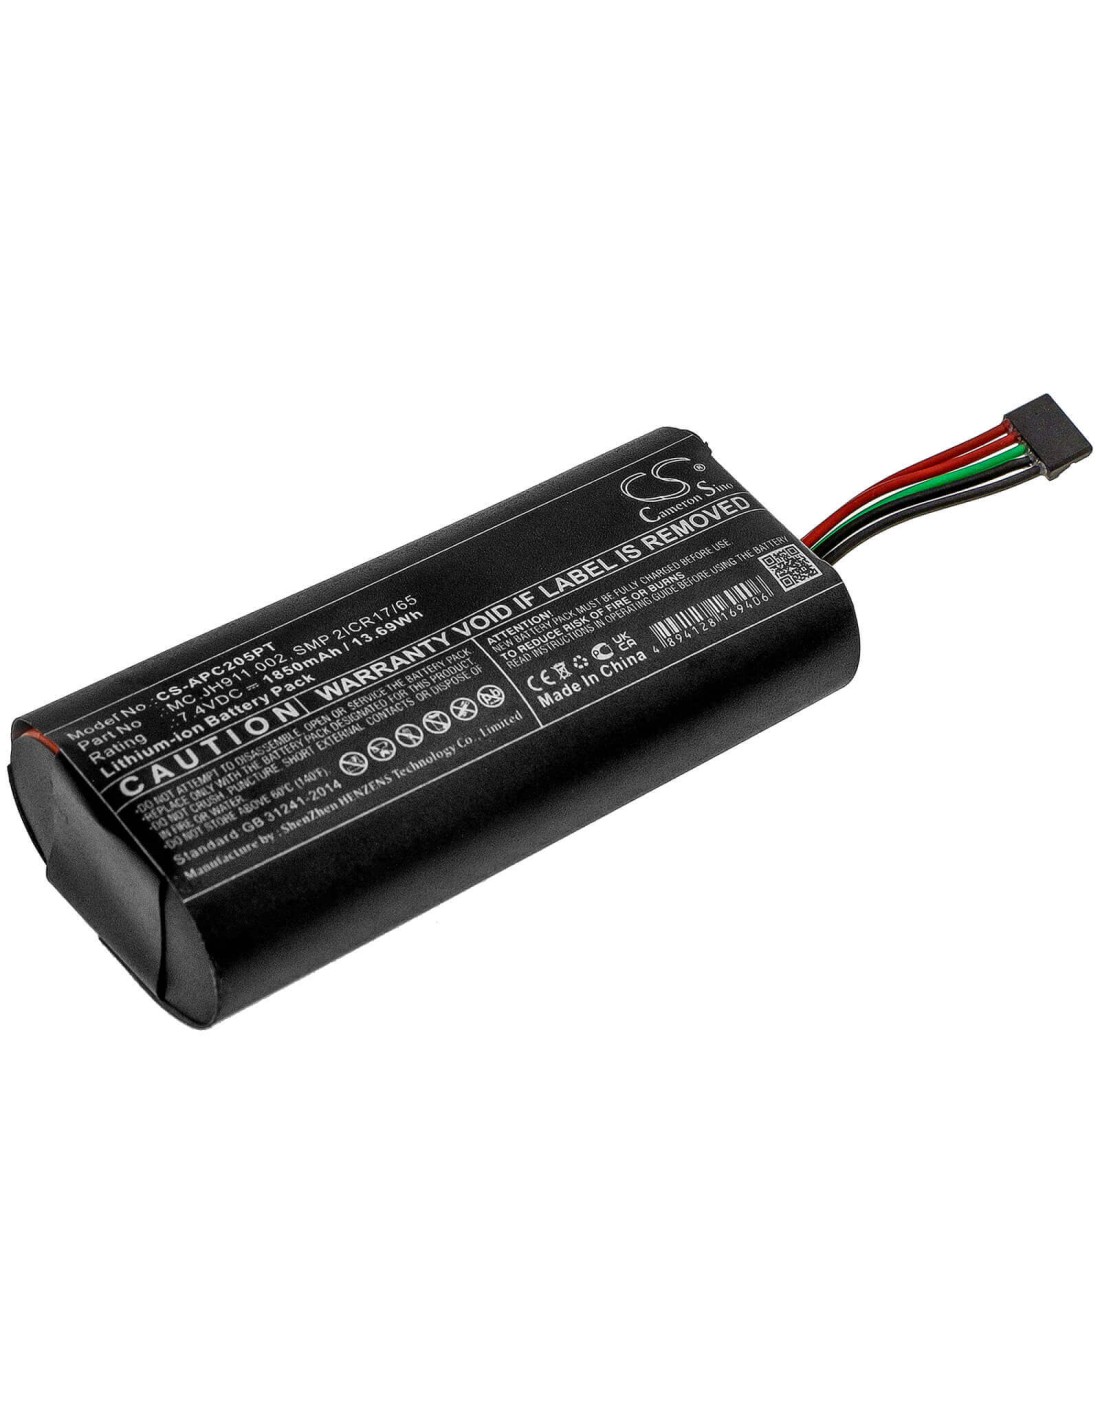 Battery for Acer, Projector C205 7.4V, 1850mAh - 13.69Wh